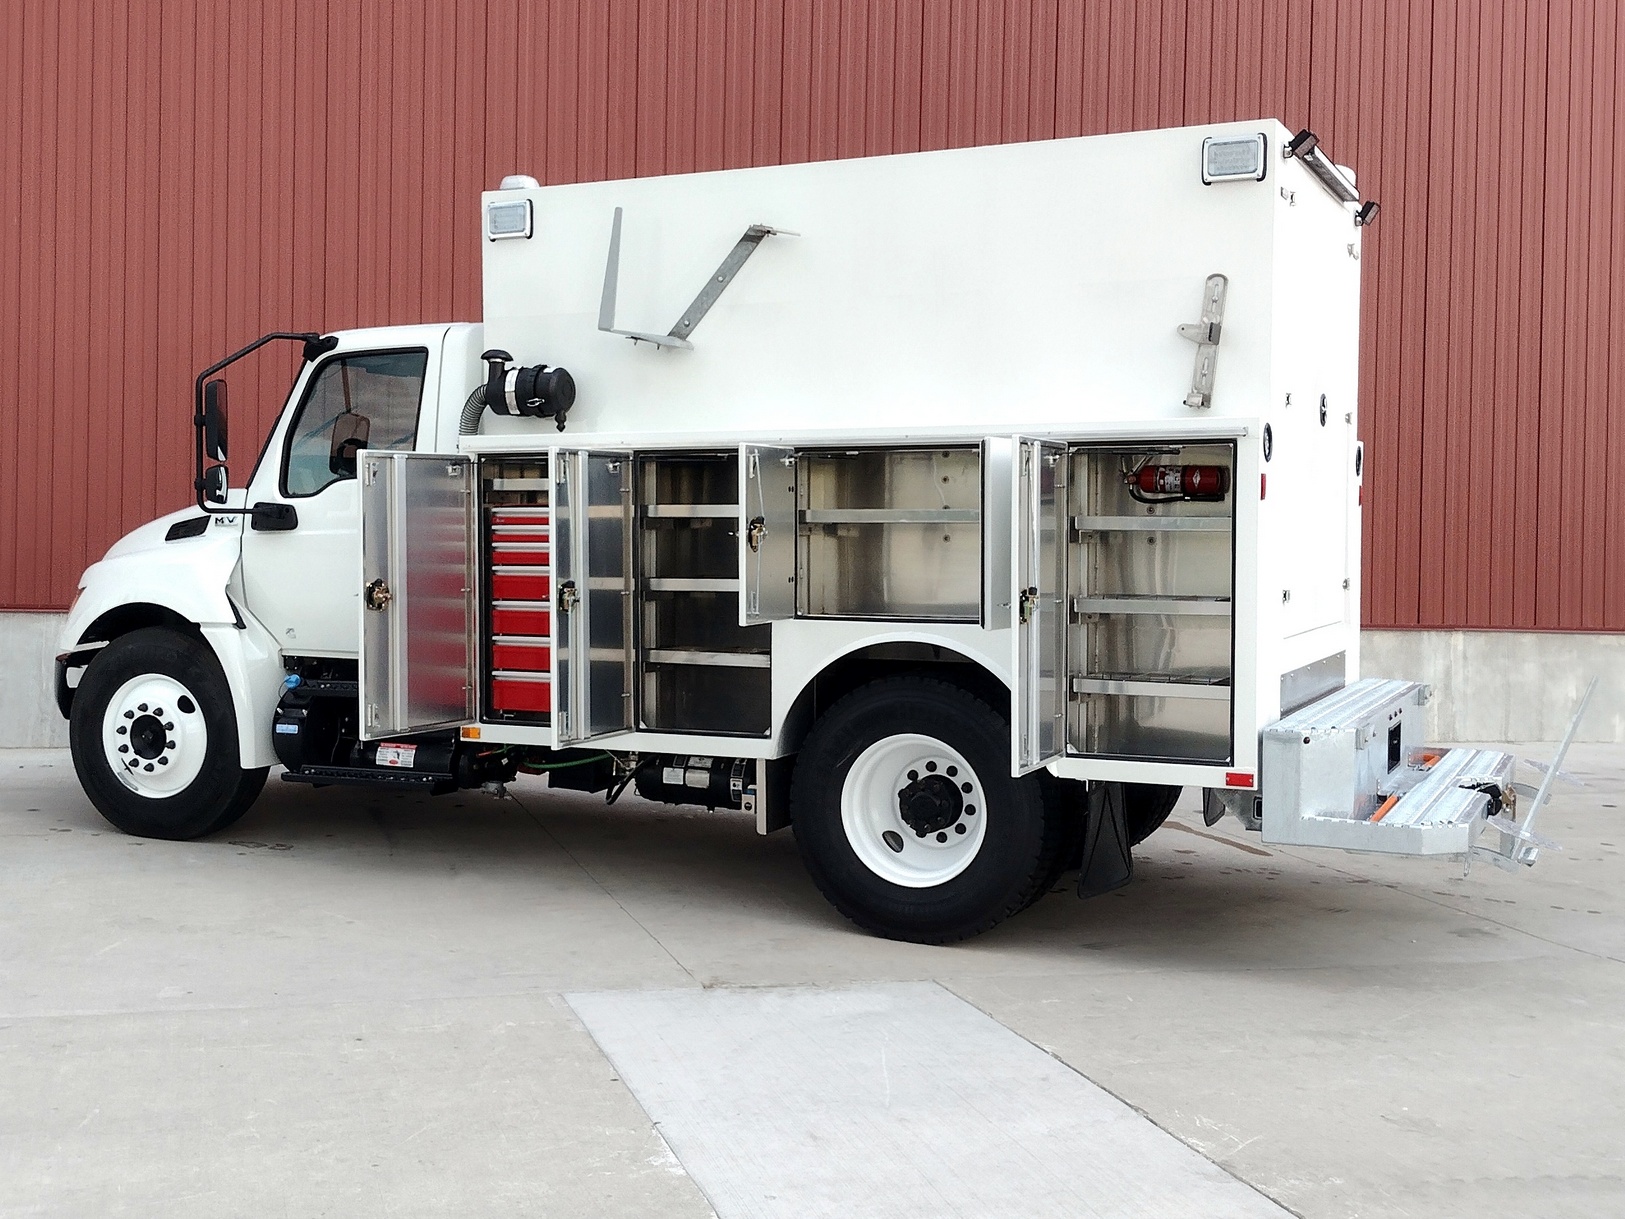 Left side and slightly from the rear view of a Sauber Mfg. Co. NexGen Aluminum Service Body. White with superstructure enclosure on a larger truck with dual axles. Four service compartment doors are open with shelves and tool storage are visible. Galvanized step bumper with safety provisions. The truck is outside and shown in front of a red metal building wall on concrete.